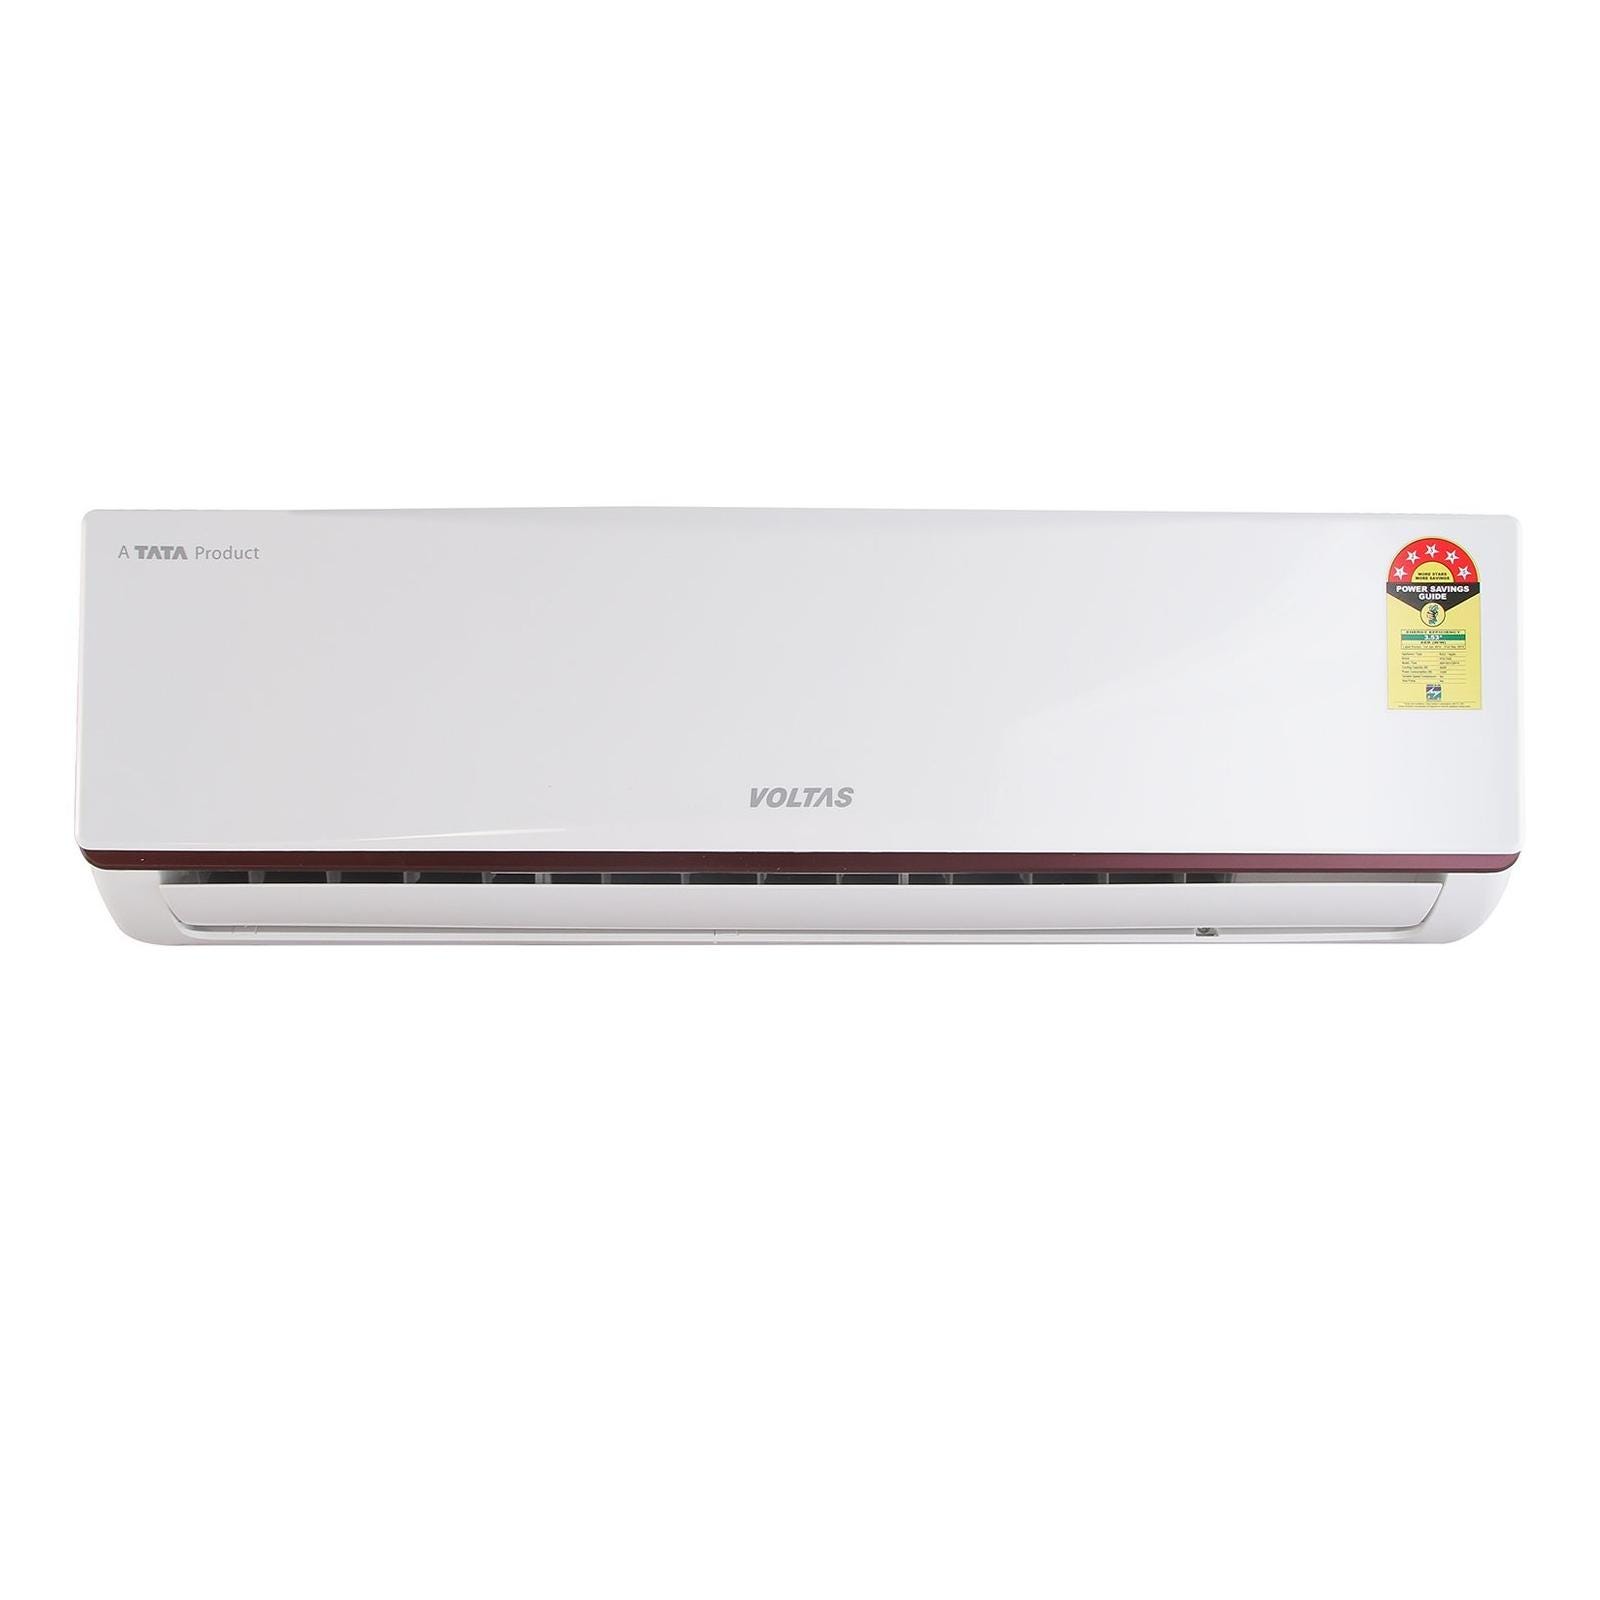 Voltas Hot and Cold 12HY 1 Ton Split AC 